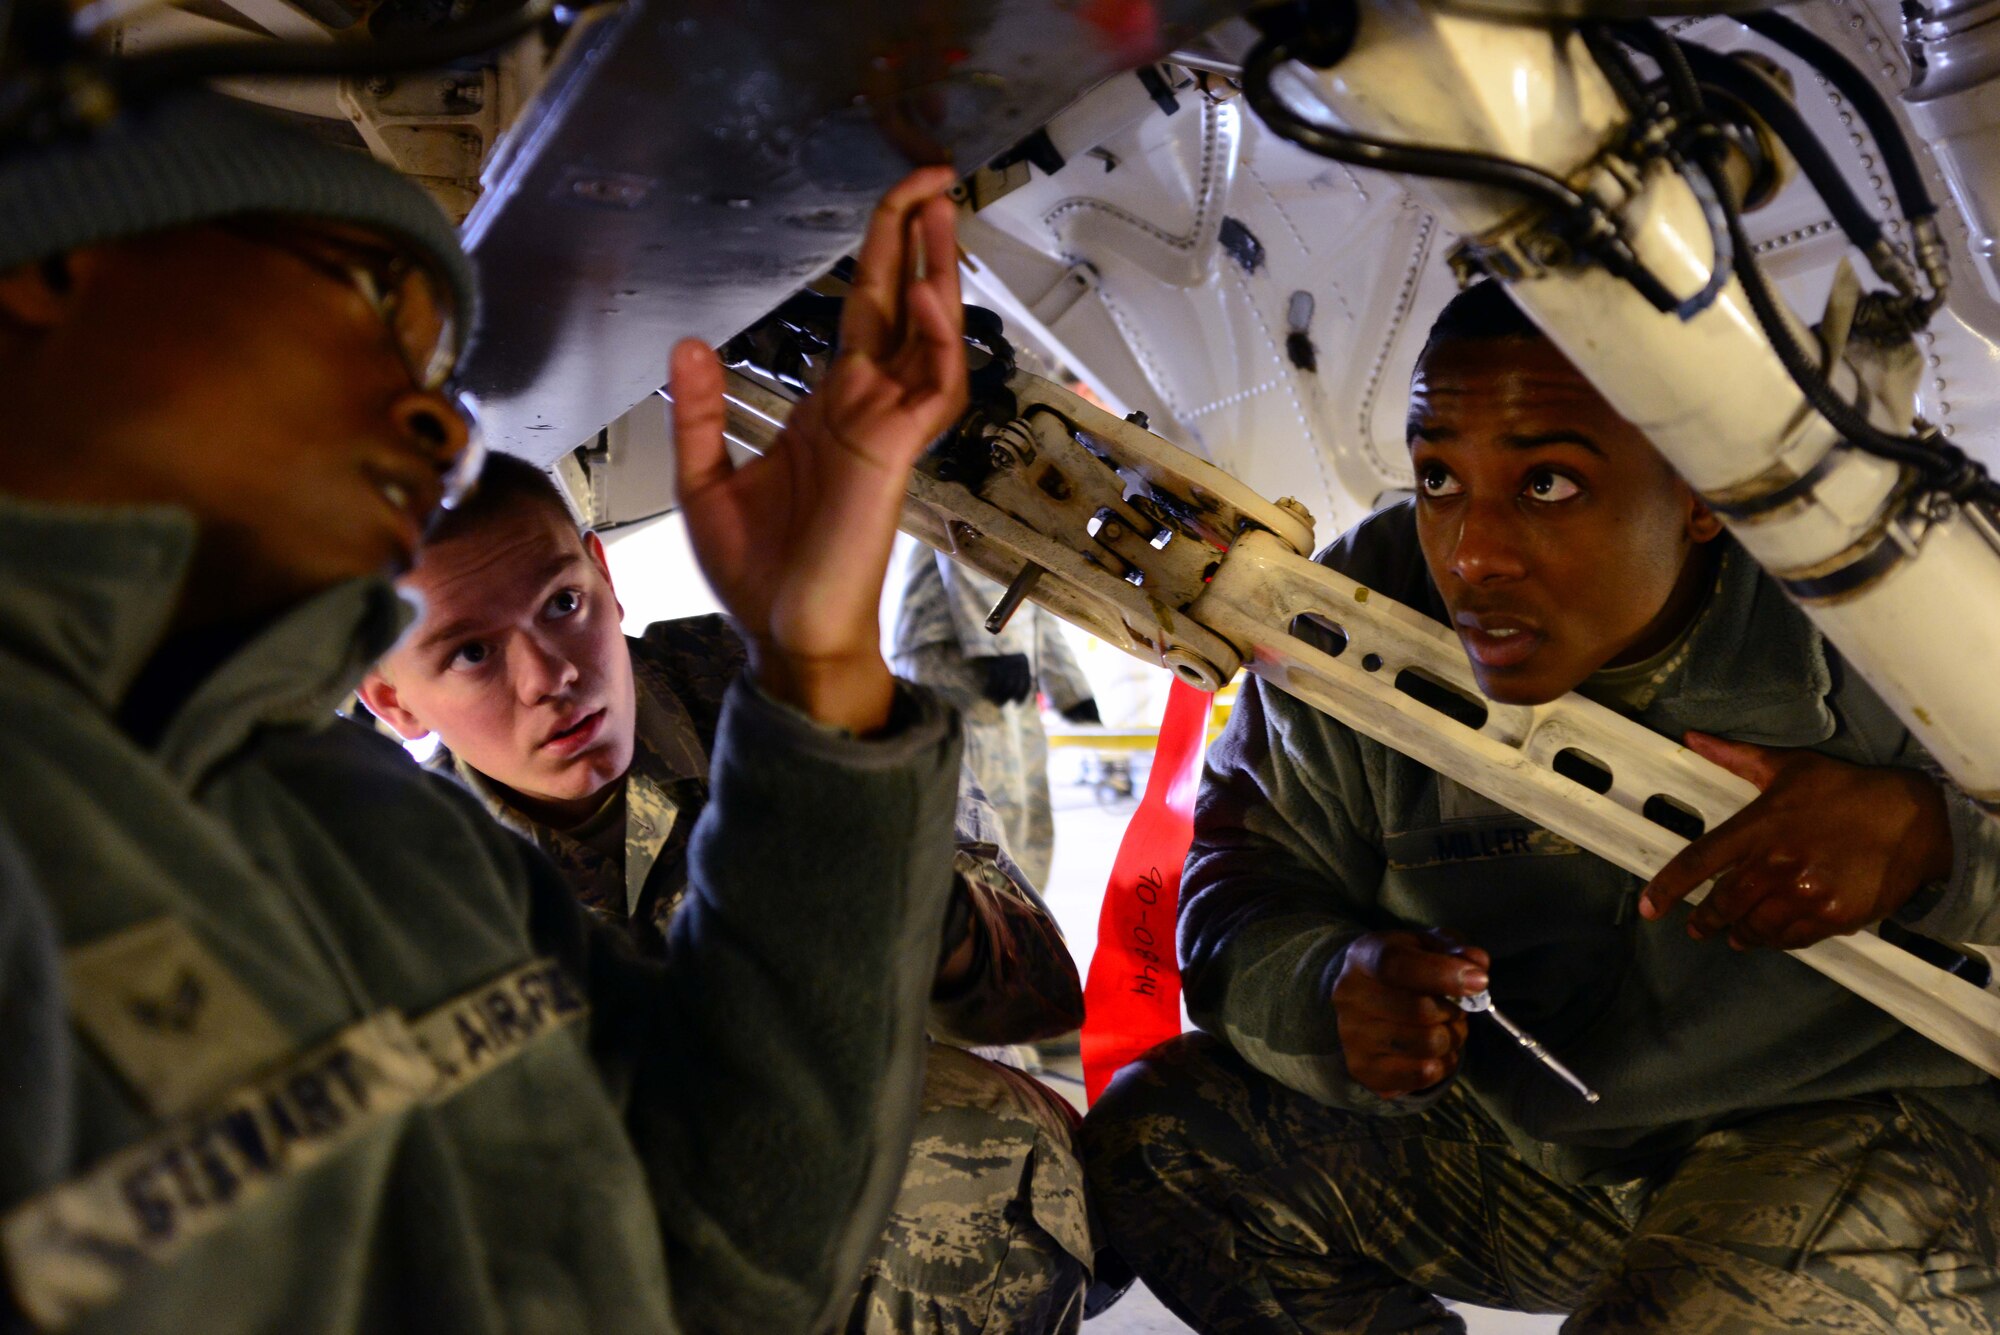 From left: Airman 1st Class Mekai Stewart, Senior Airman Ryan Skarin and Senior Airman James Miller, 35th Aircraft Maintenance Squadron weapons systems technicians, remove a center line pylon to replace cover panels on an F-16 Fighting Falcon at Misawa Air Base, Japan, Dec. 6, 2013. The center line pylon connects fuel tanks, bombs and pods to the jet, and is routinely checked for maintenance. (U.S. Air Force photo by Senior Airman Derek VanHorn)